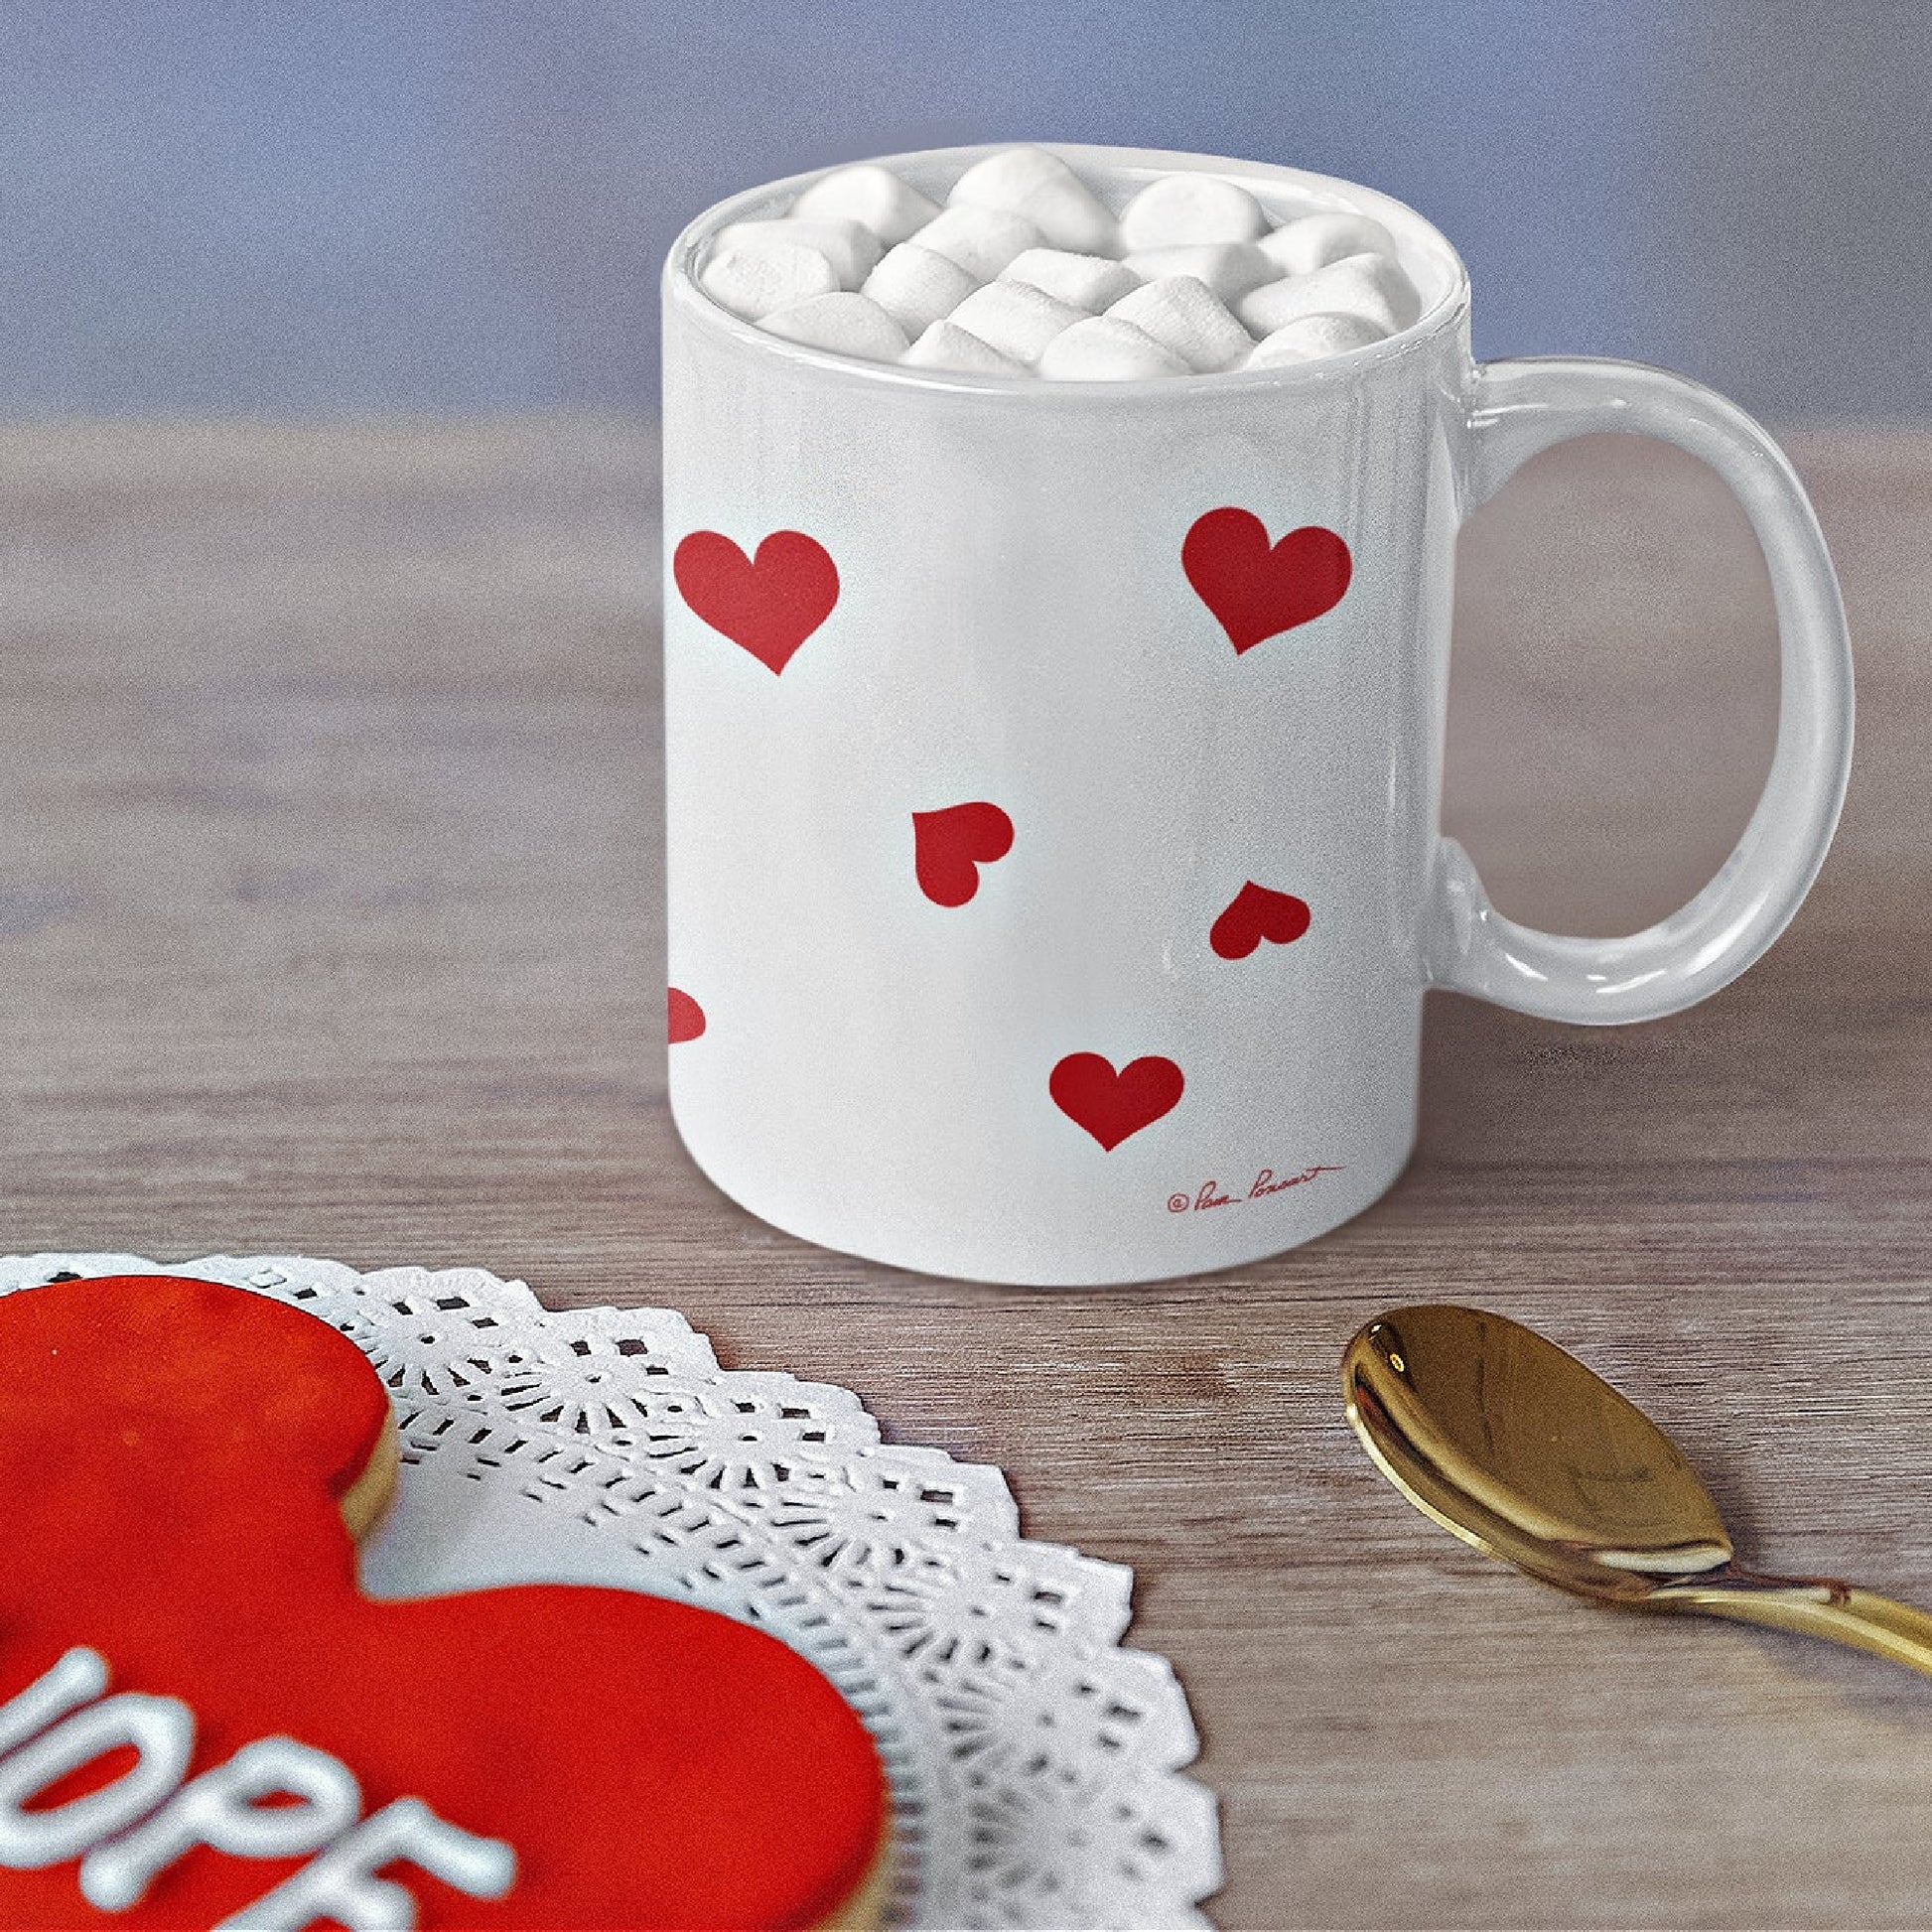 Mock up of our Valentine Love Mug on a table next to a red cookie